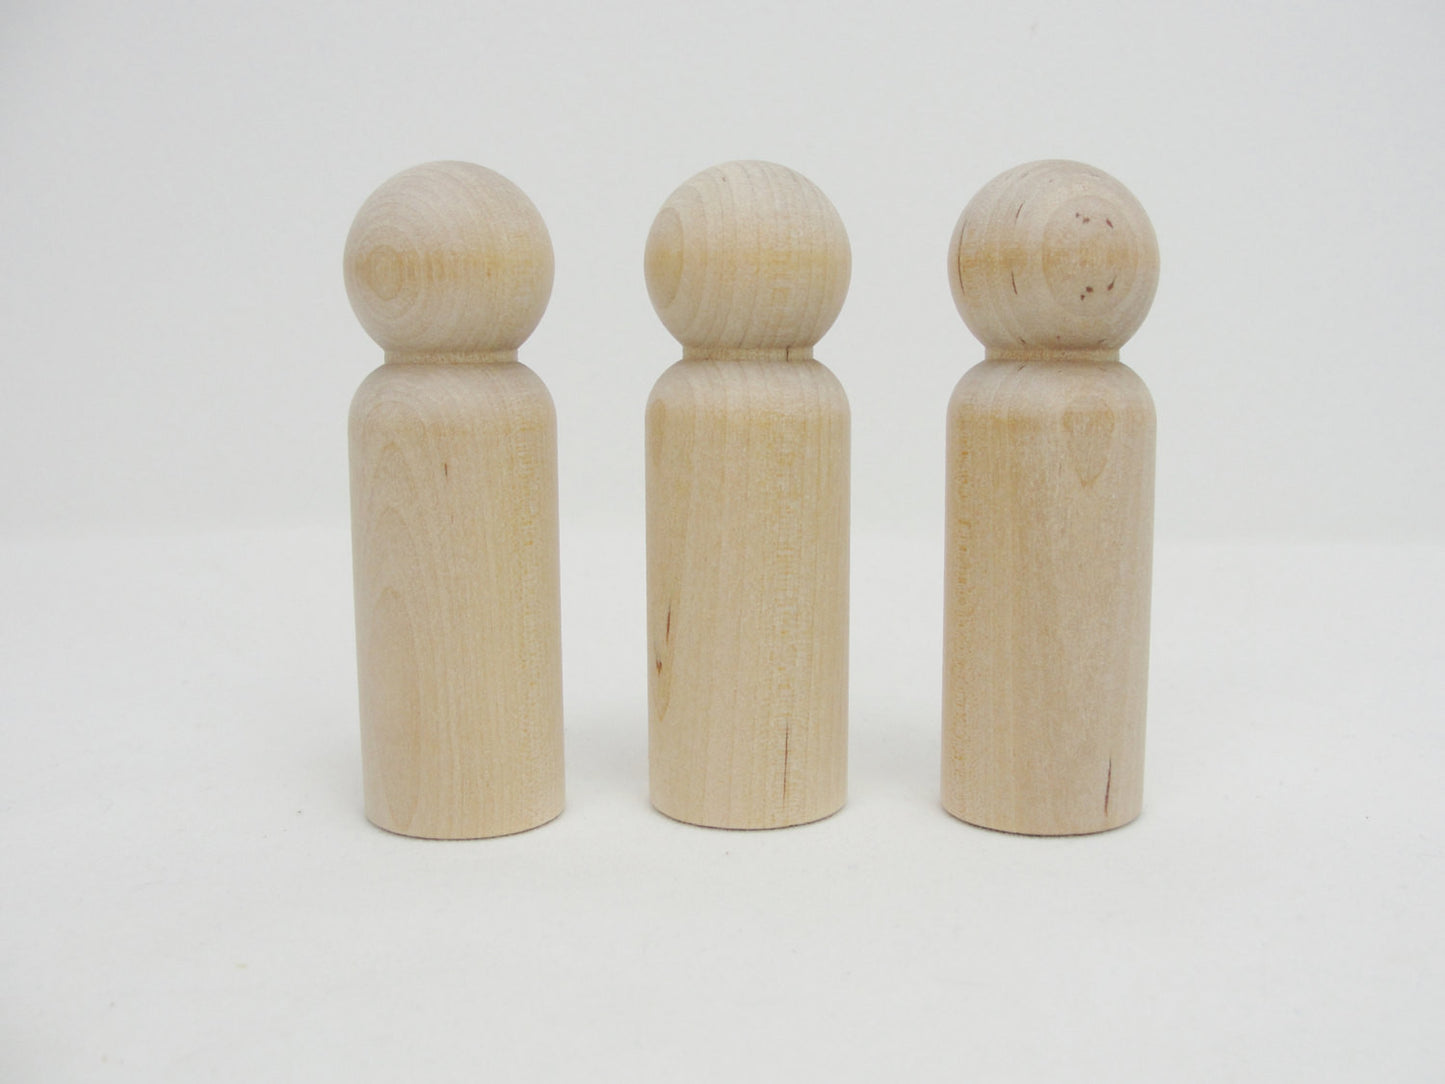 Large Wooden peg people man 3 1/2" tall - Wood parts - Craft Supply House